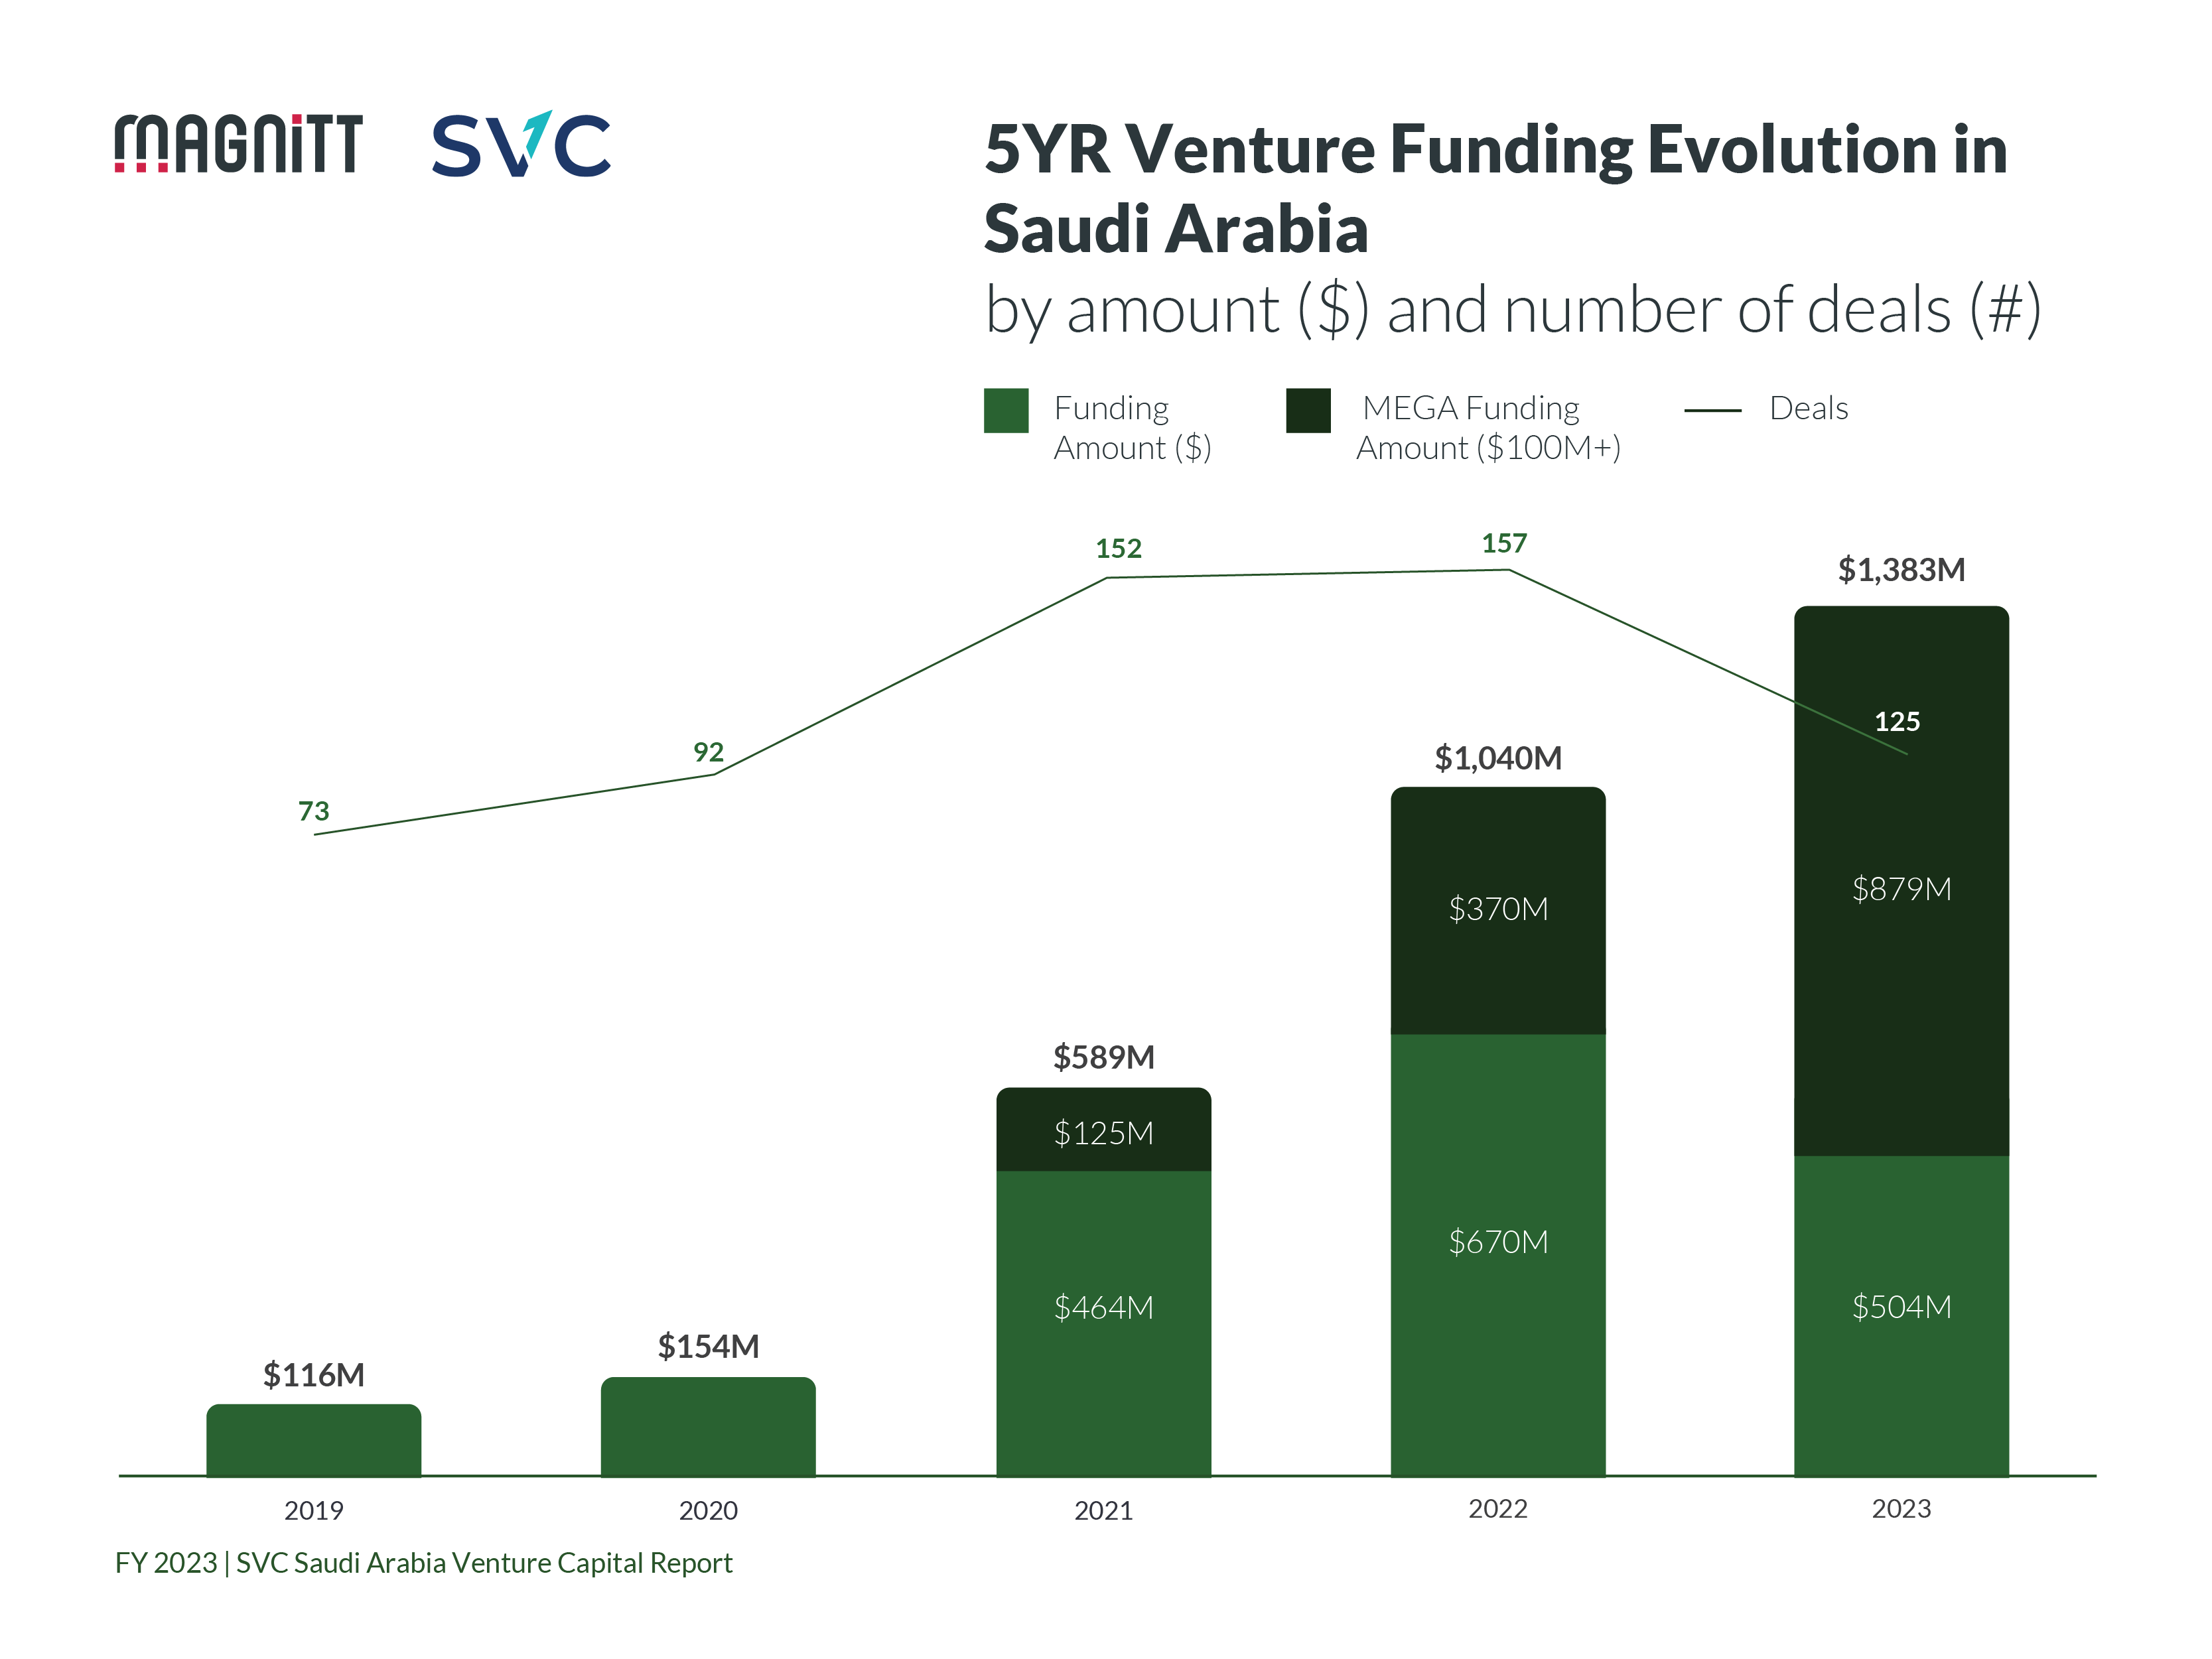 Five-year venture funding evolution in Saudi Arabia by amount (US$) and number of deals, Source: FY 2023 Saudi Arabia Venture Capital Report, Magnitt and SVC, January 2024